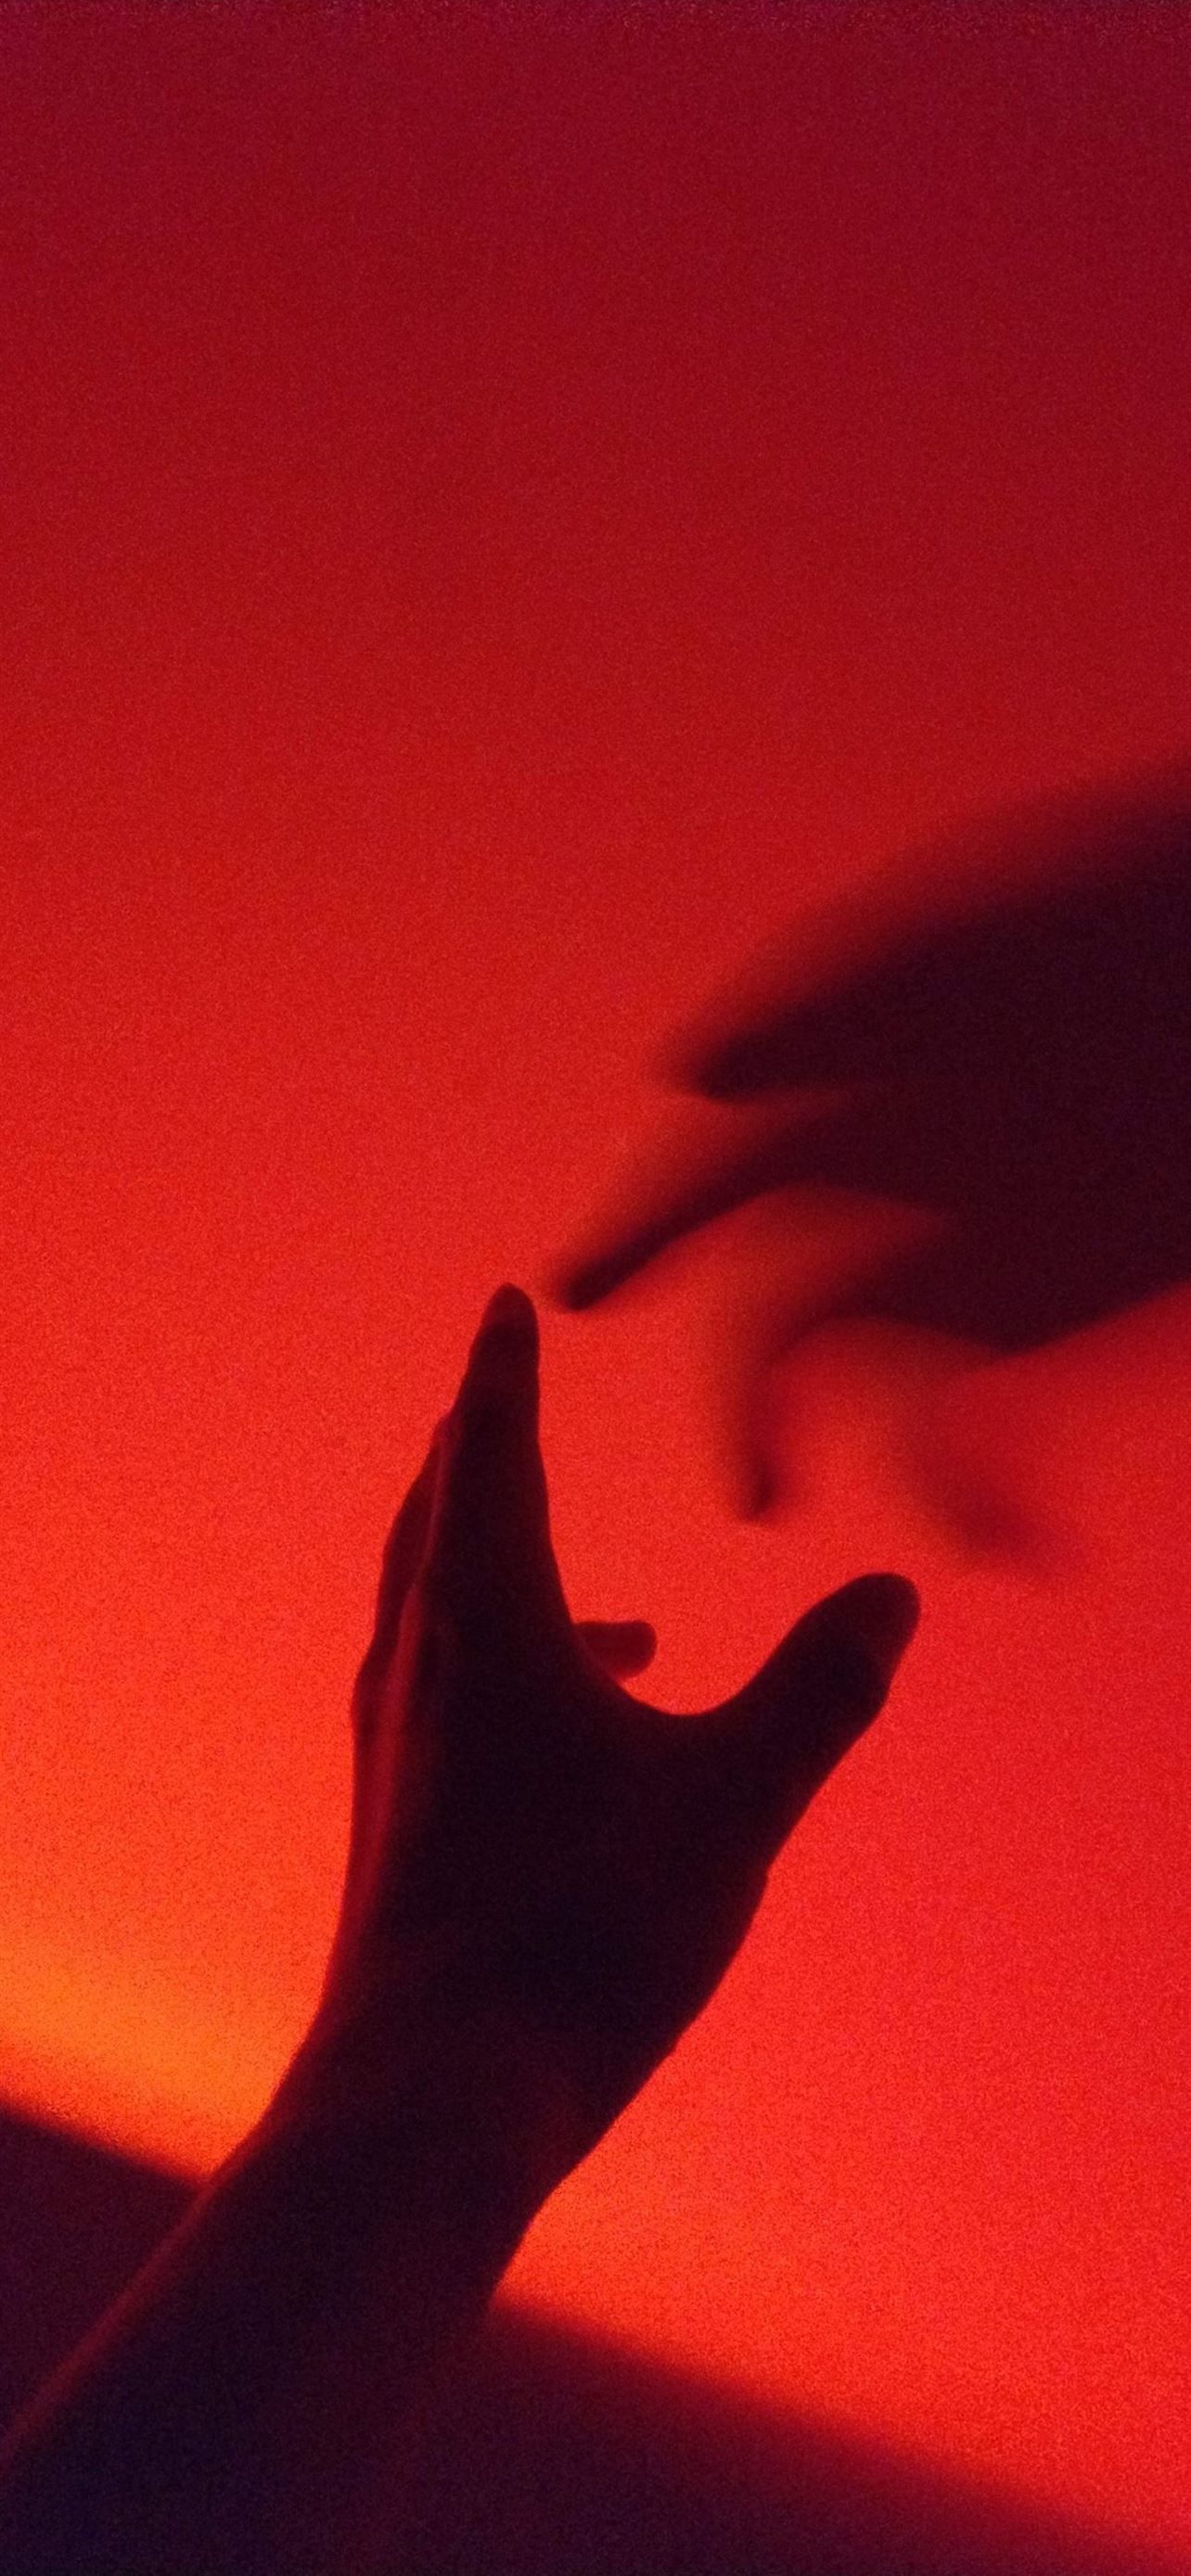 person's hand with shadow iPhone Wallpaper Free Download